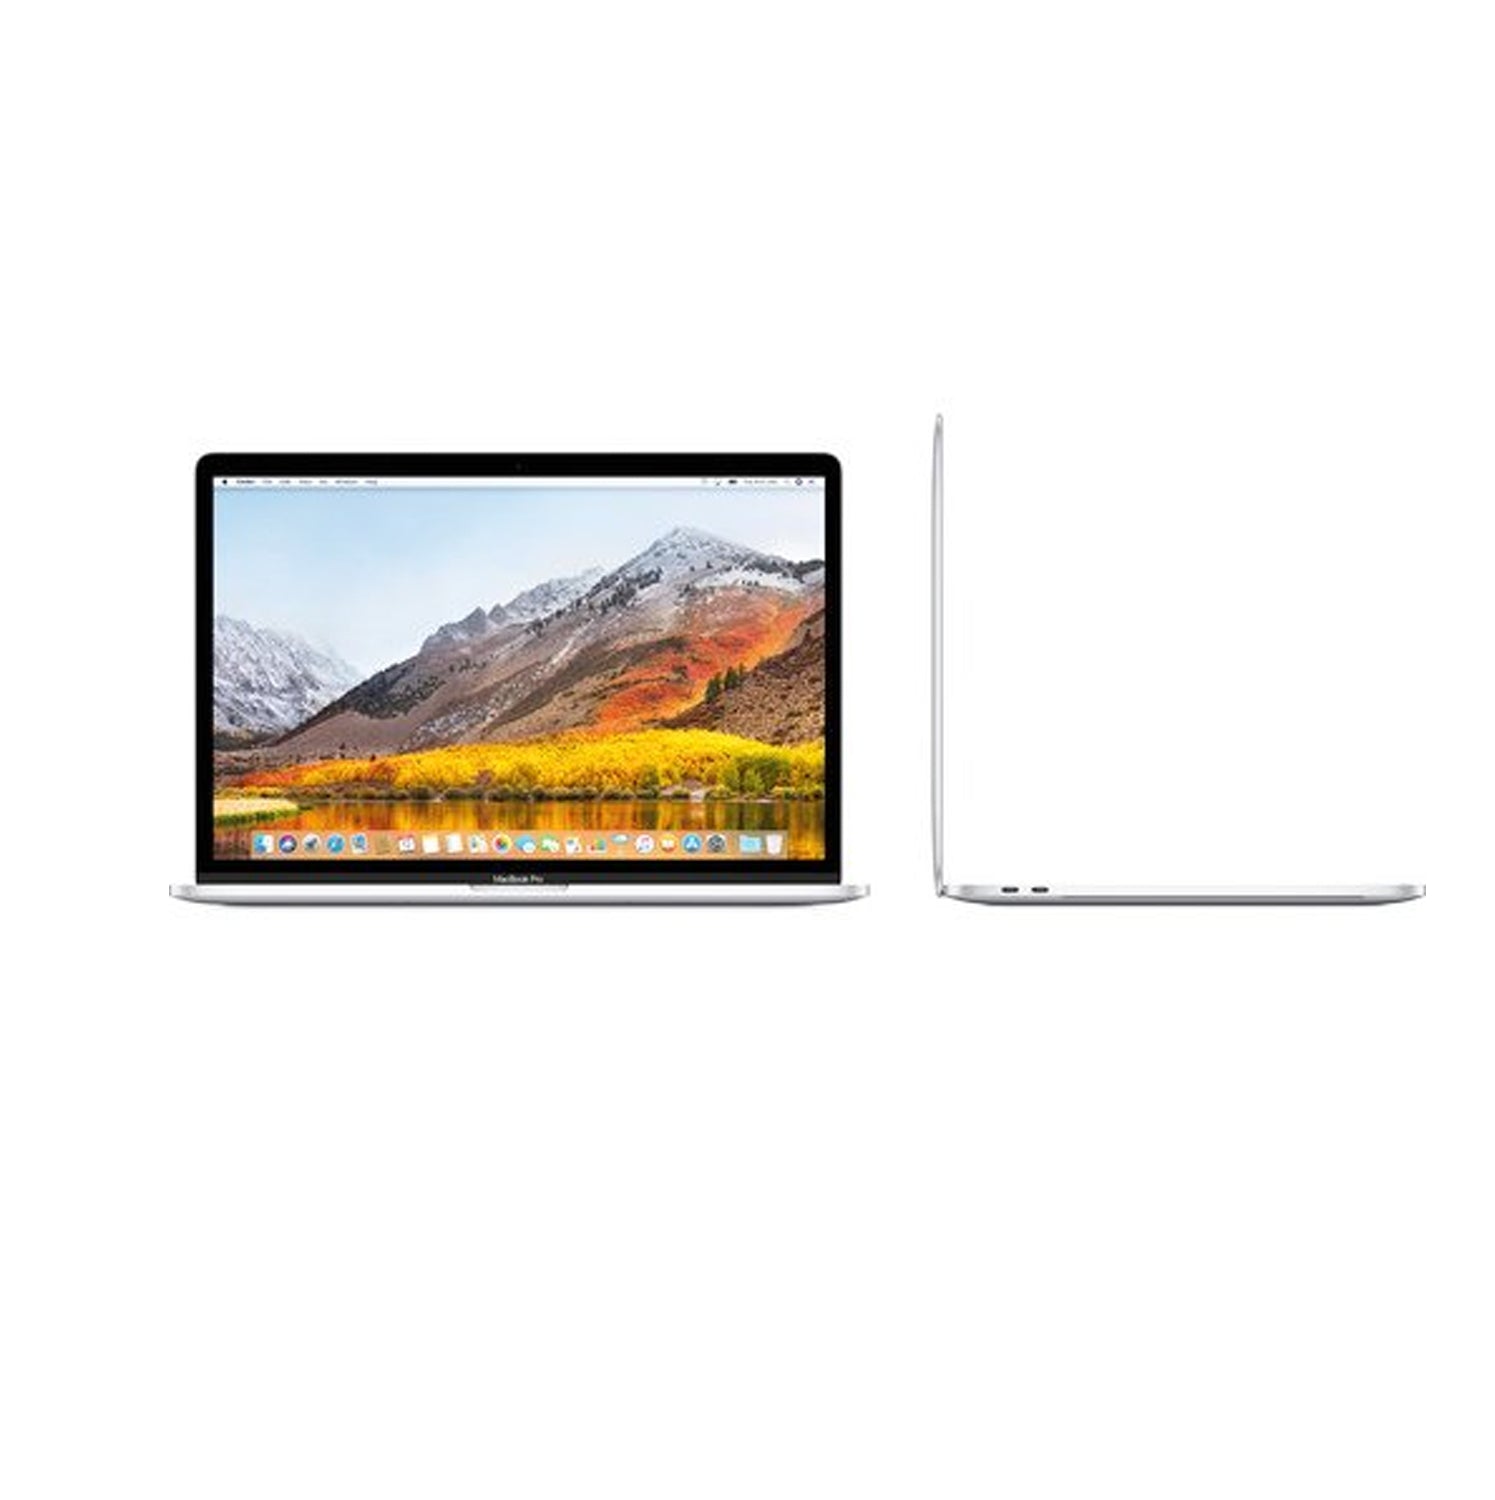 Apple MacBook Pro 15-inch with Touch Bar 256GB - Silver (Spanish Keyboard) MR962E/A with Cleaning Kit